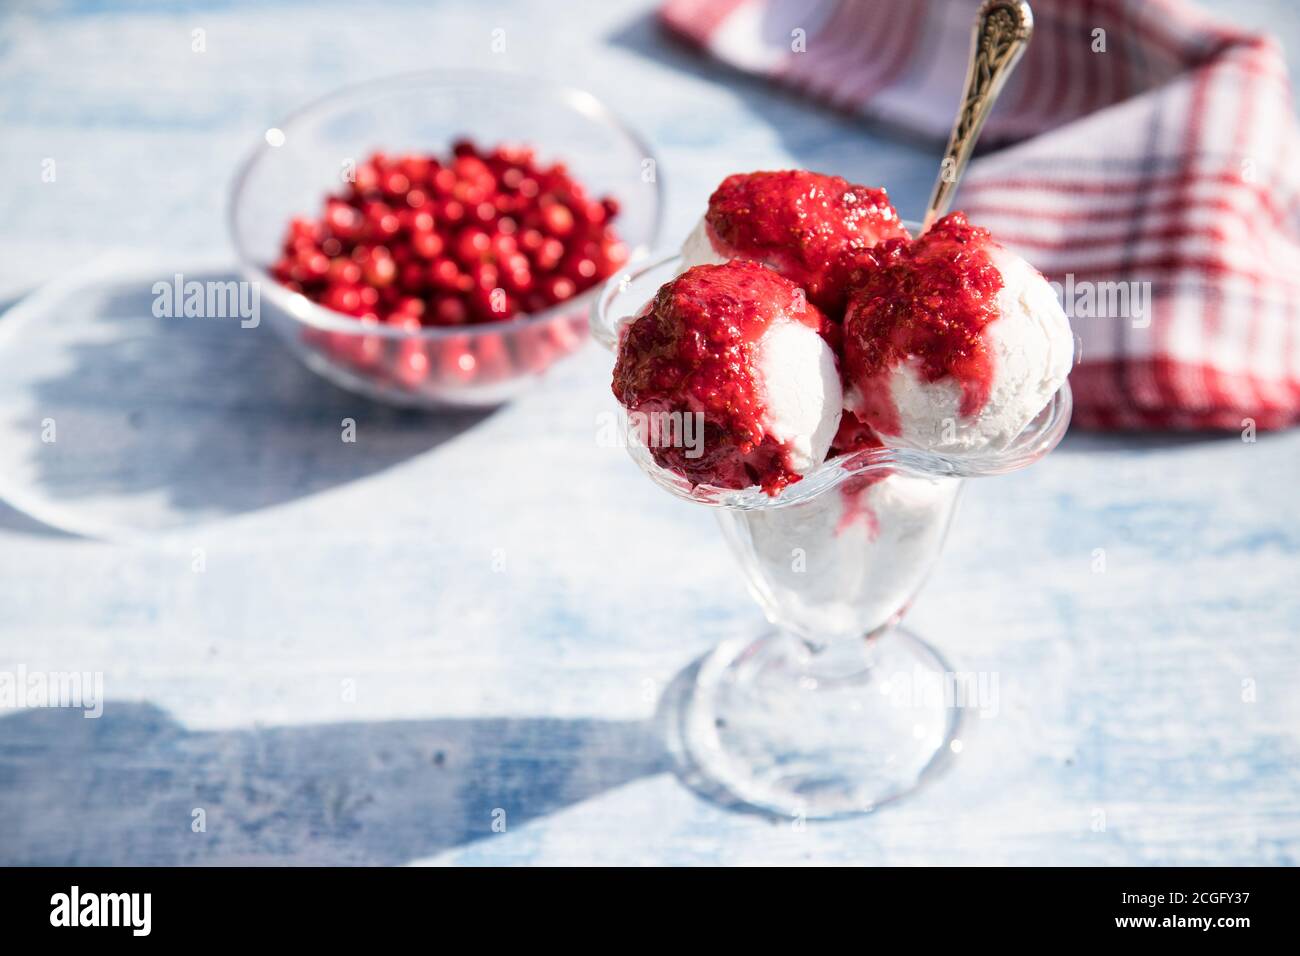 Balls of vegan chickpea ice cream in a glass bowl with cranberries on a light background. Horizontal orientation. Place for copy space Stock Photo